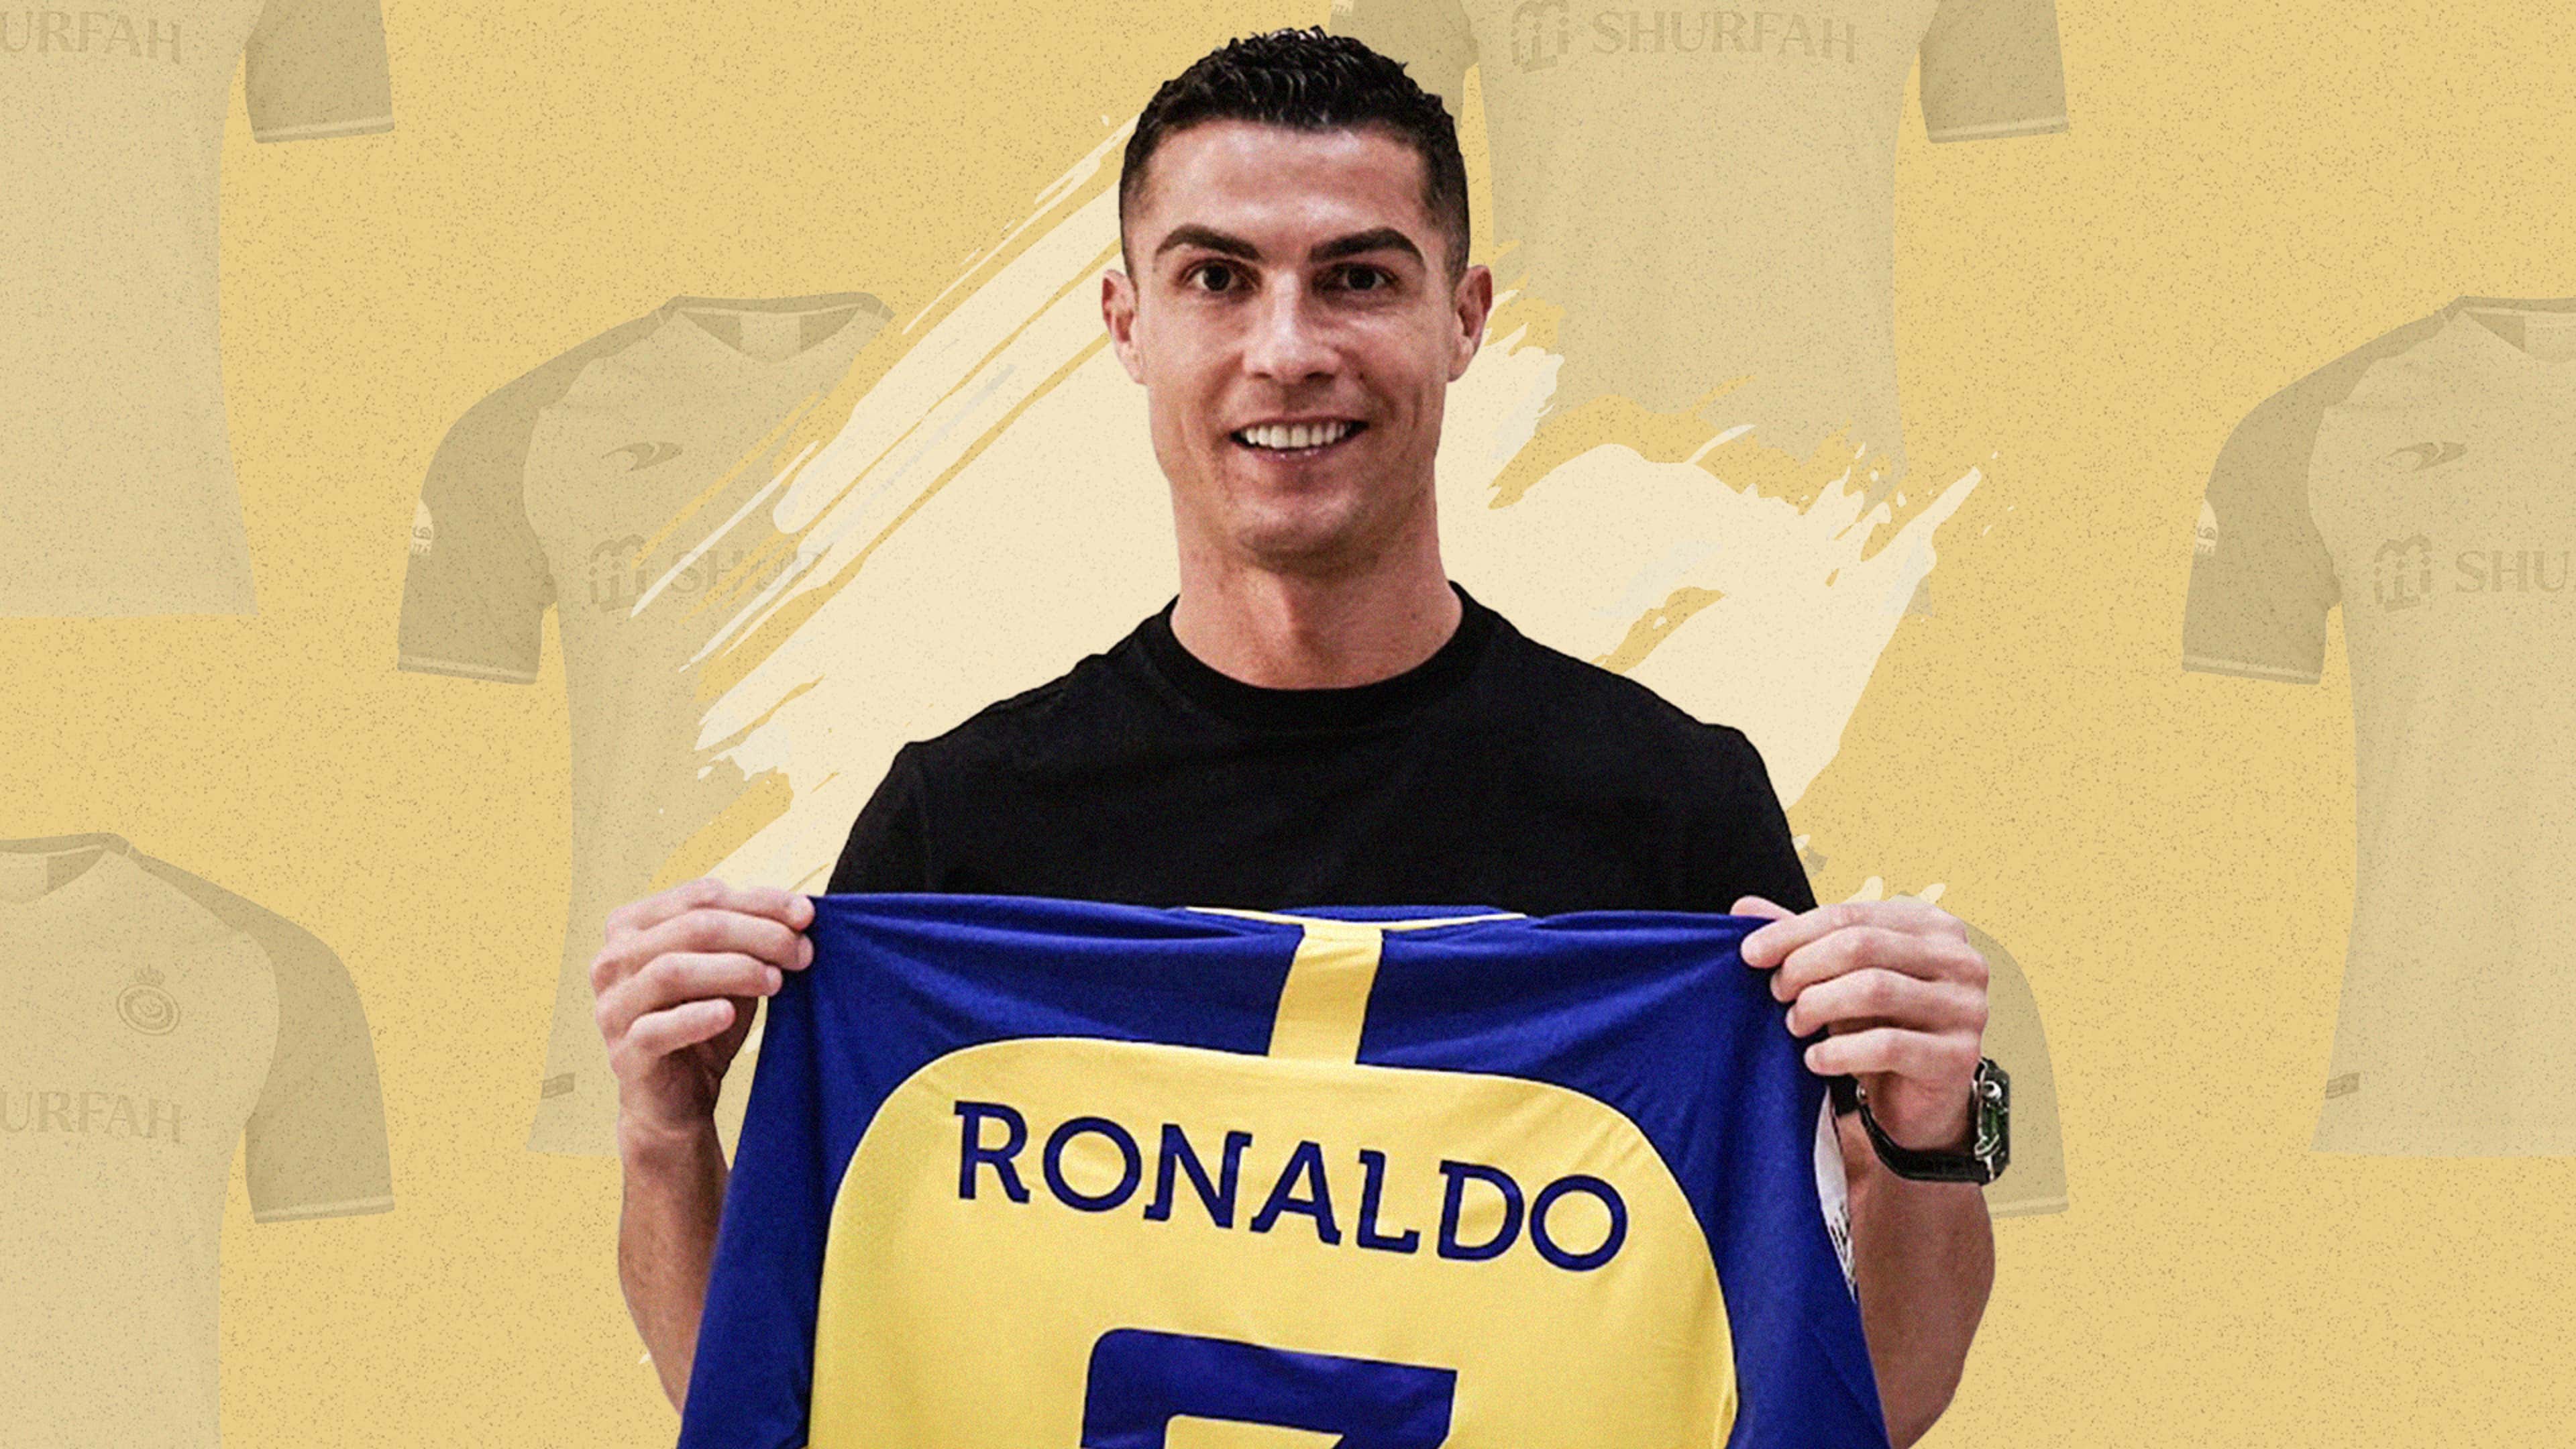 Cristiano Al-Nassr jersey: Where can I buy it what is Ronaldo's shirt number? | Goal.com US